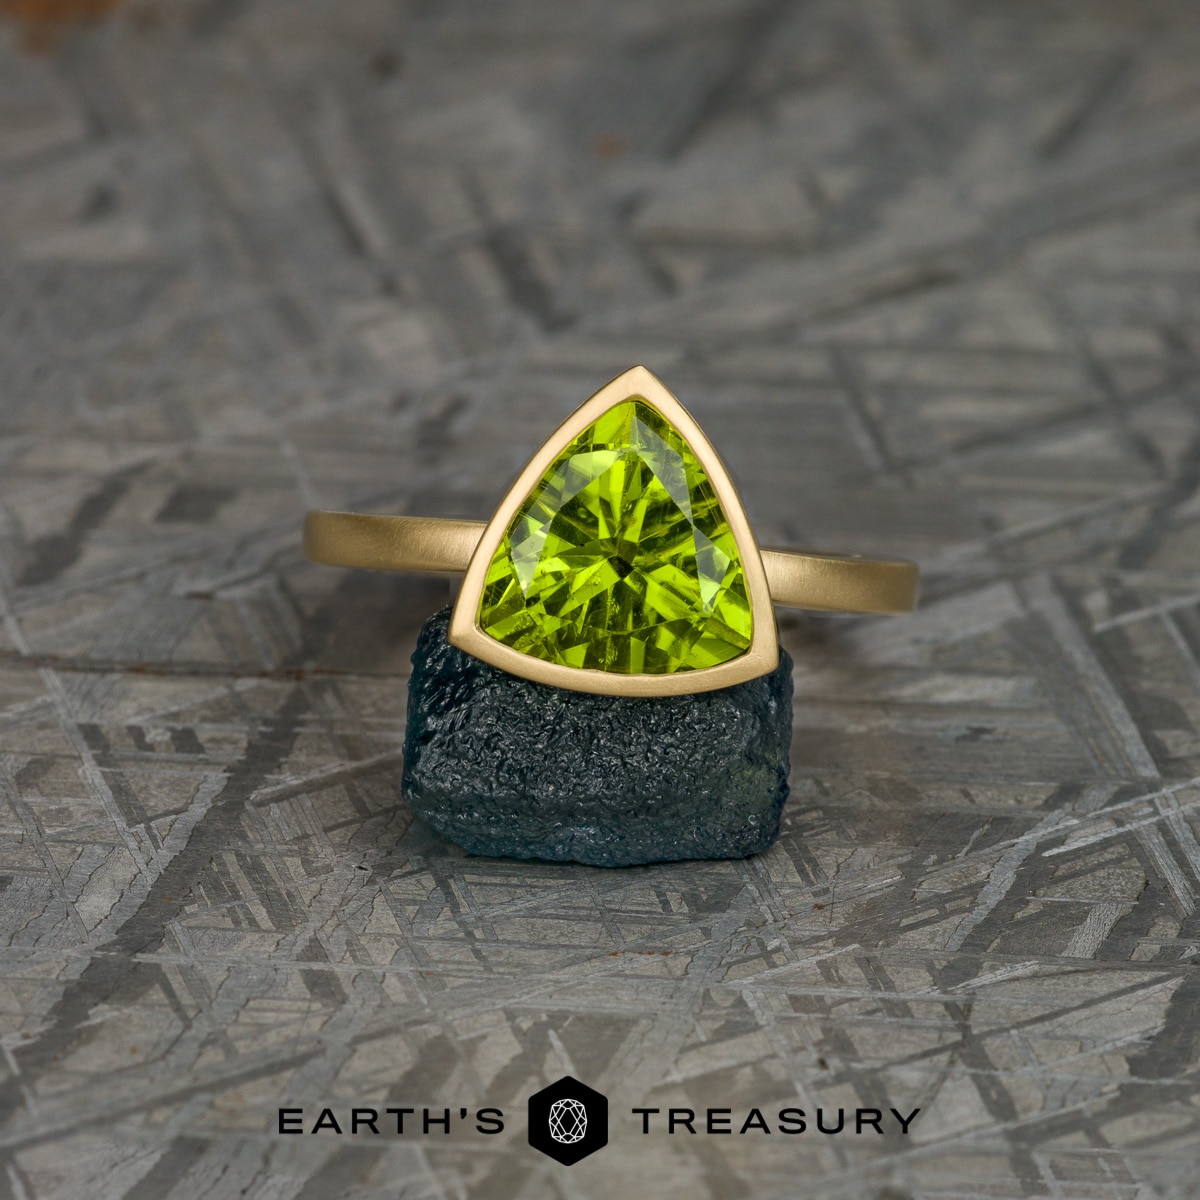 The "Emma" in 18k yellow gold, brushed, with 3.37-carat peridot